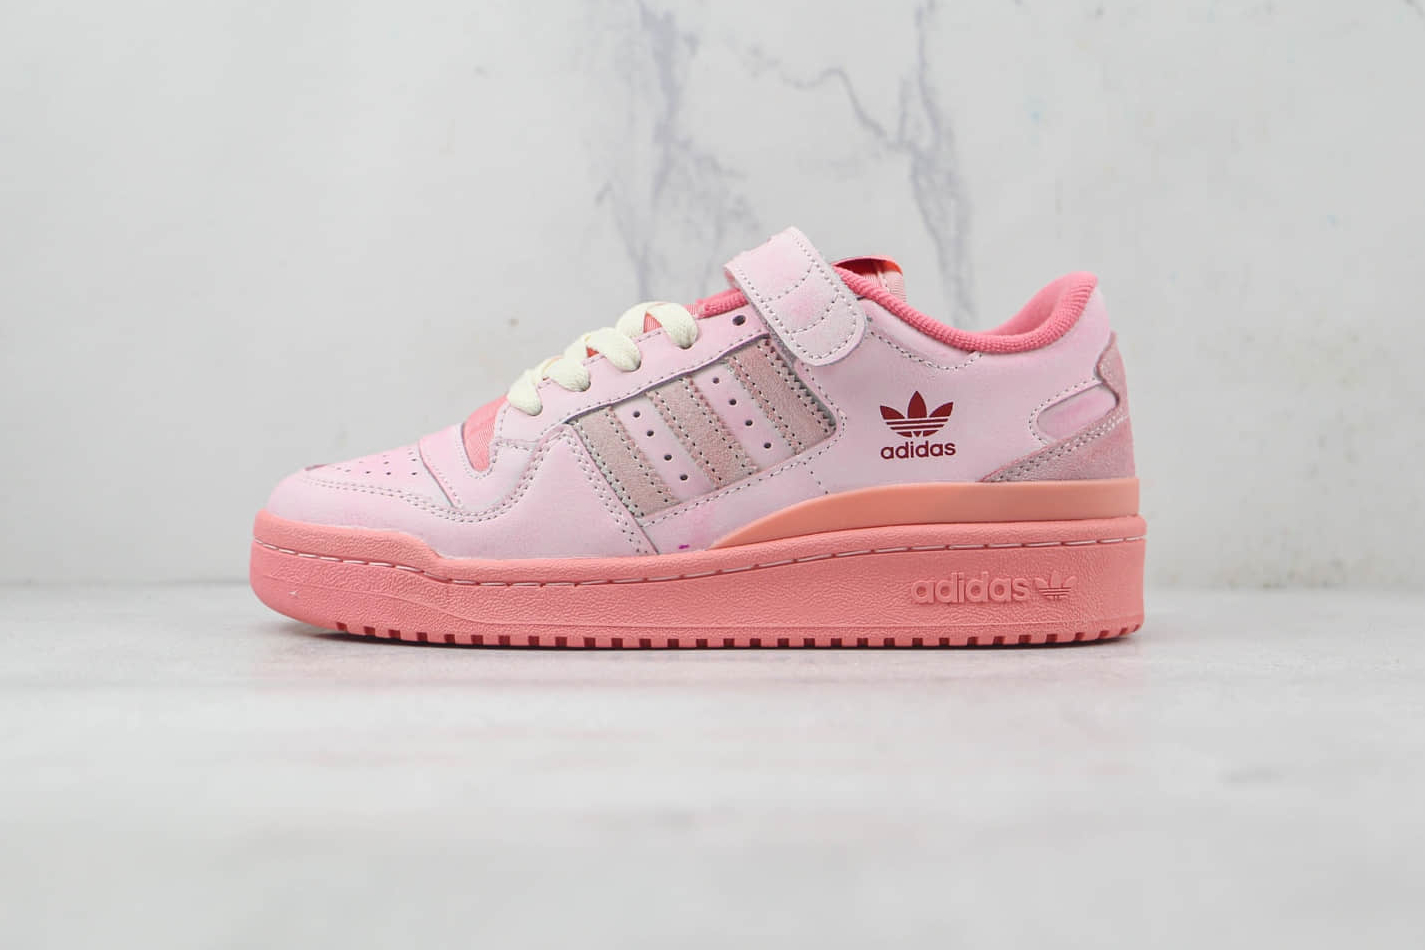 Adidas Forum 84 Low 'Pink' GY6980 - Stylish and Trendy Sneakers for Women